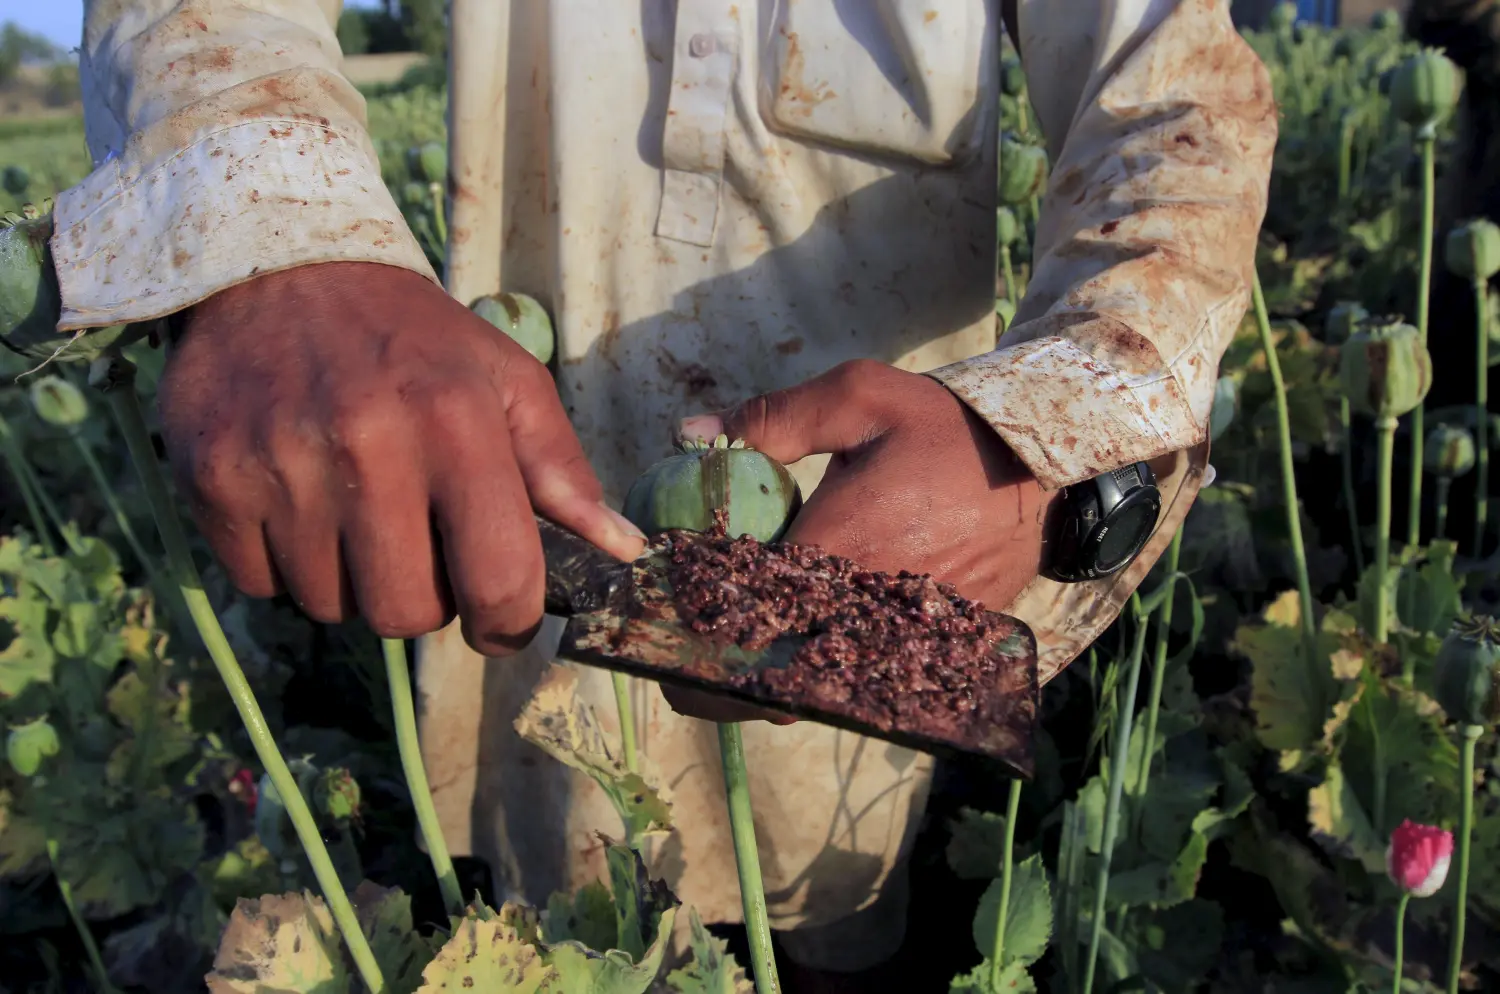 Raw opium from a poppy head is seen at a poppy farmer's field on the outskirts of Jalalabad, April 28, 2015. REUTERS/Parwiz - GF10000075581